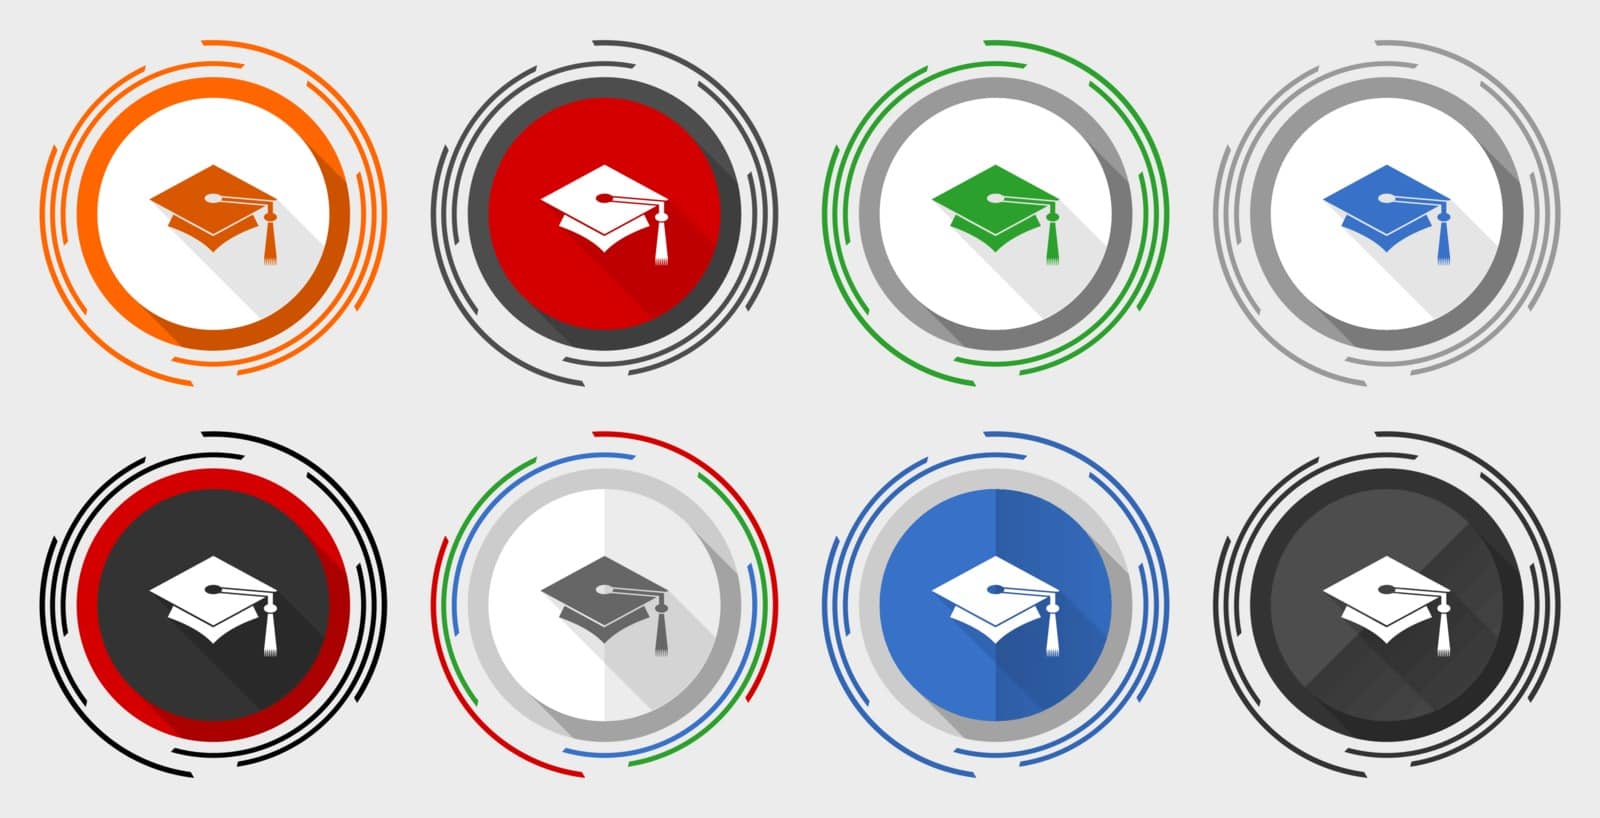 Education vector icon set, modern design flat graphic in 8 options for web design and mobile applications